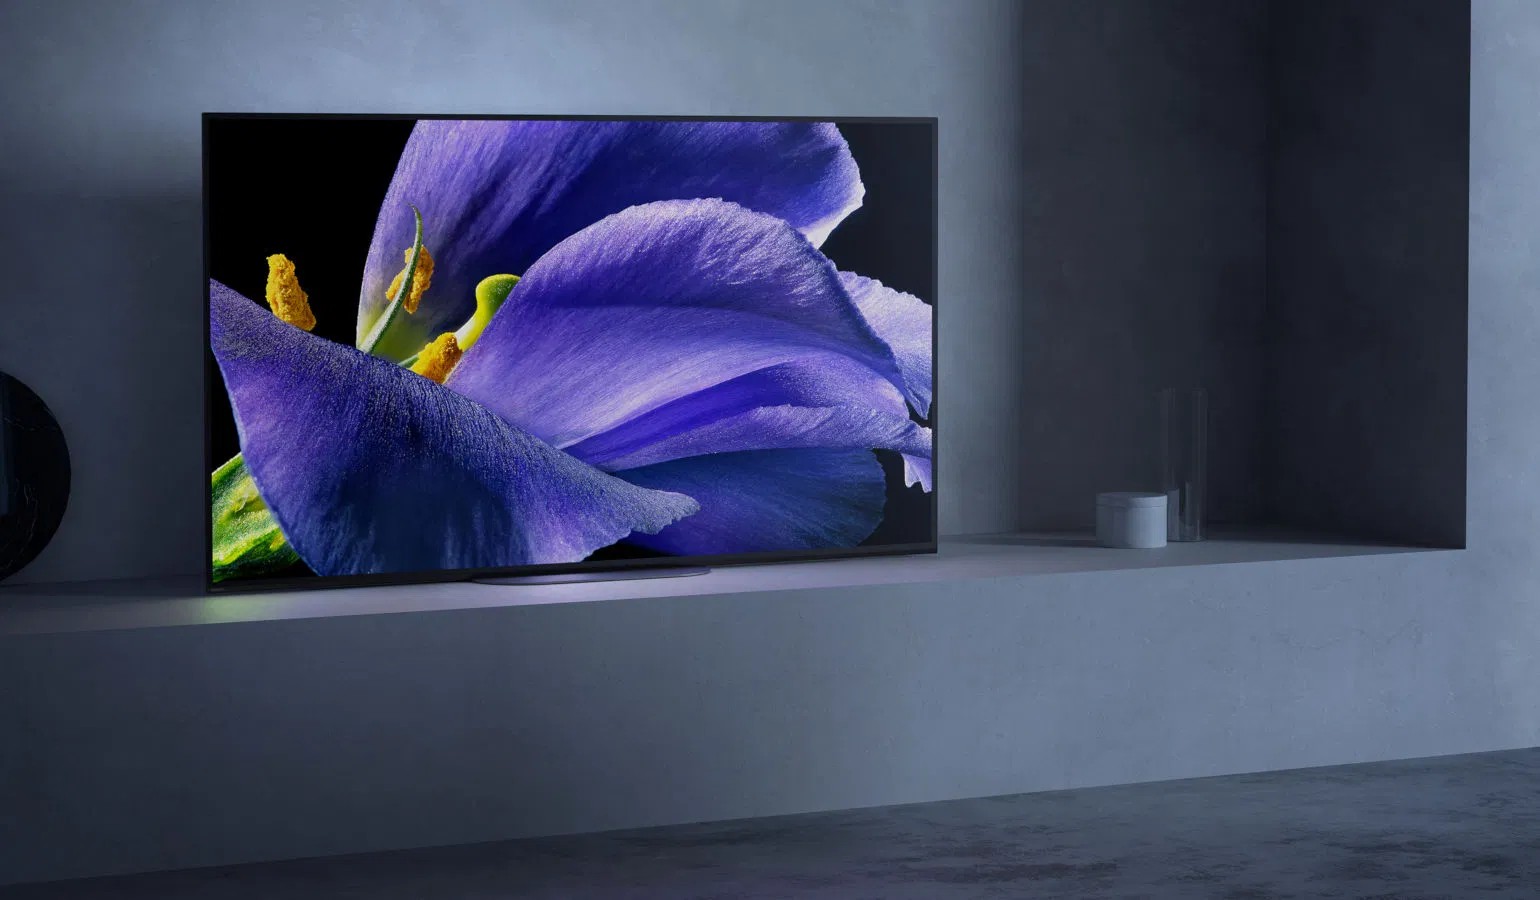 Sony KD-55AG9 Review: Excellent 4K TV from Sony